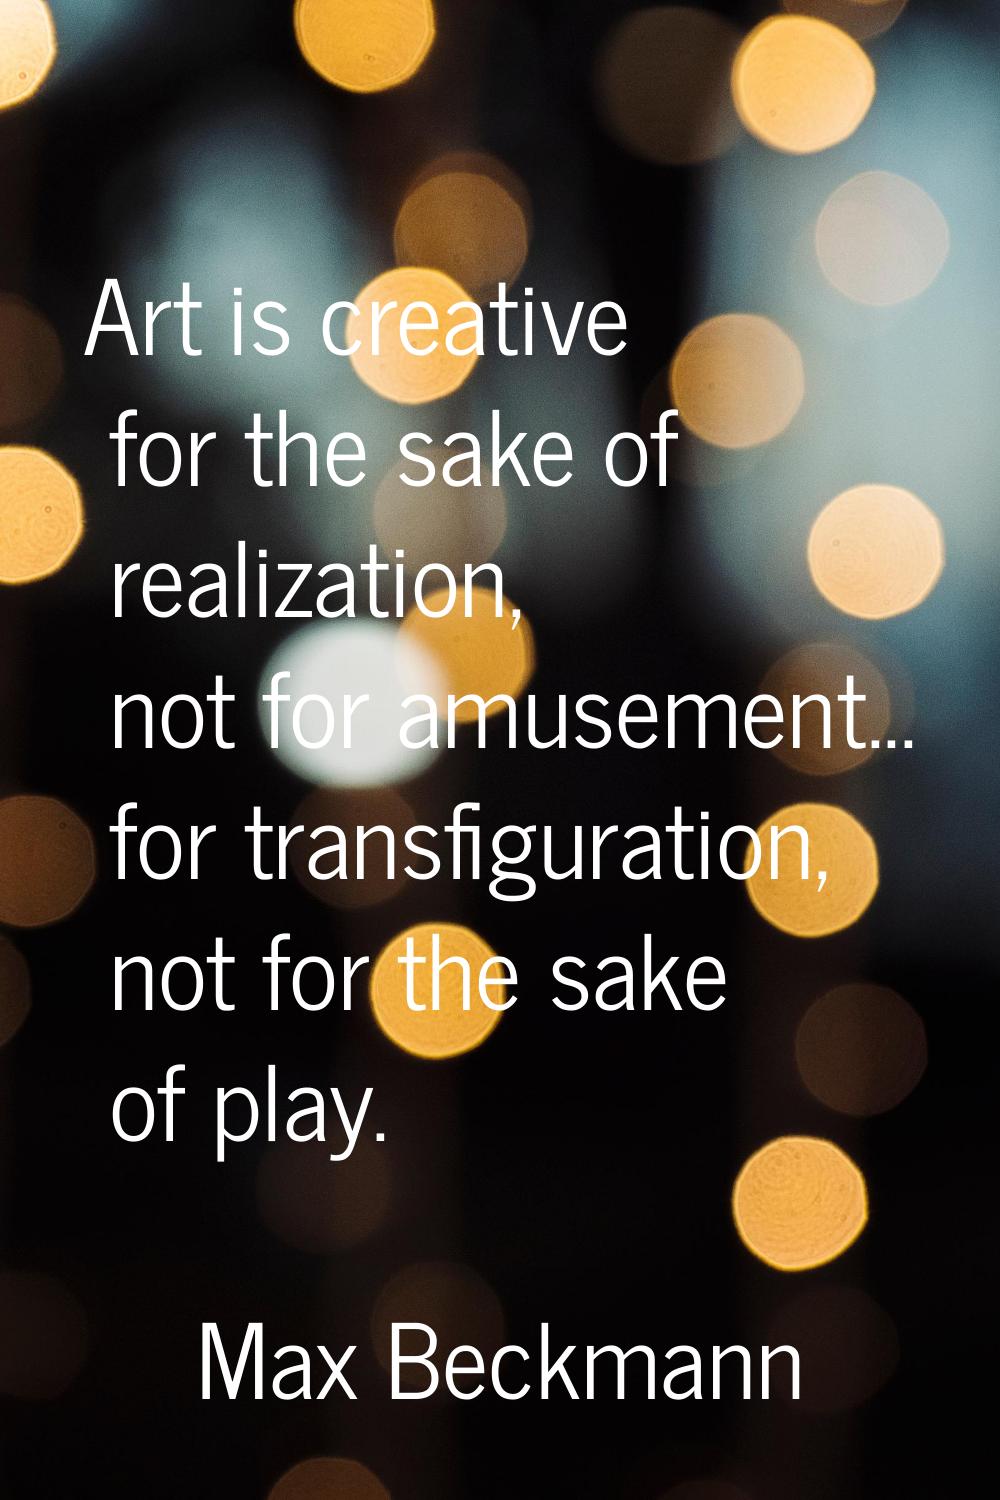 Art is creative for the sake of realization, not for amusement... for transfiguration, not for the 